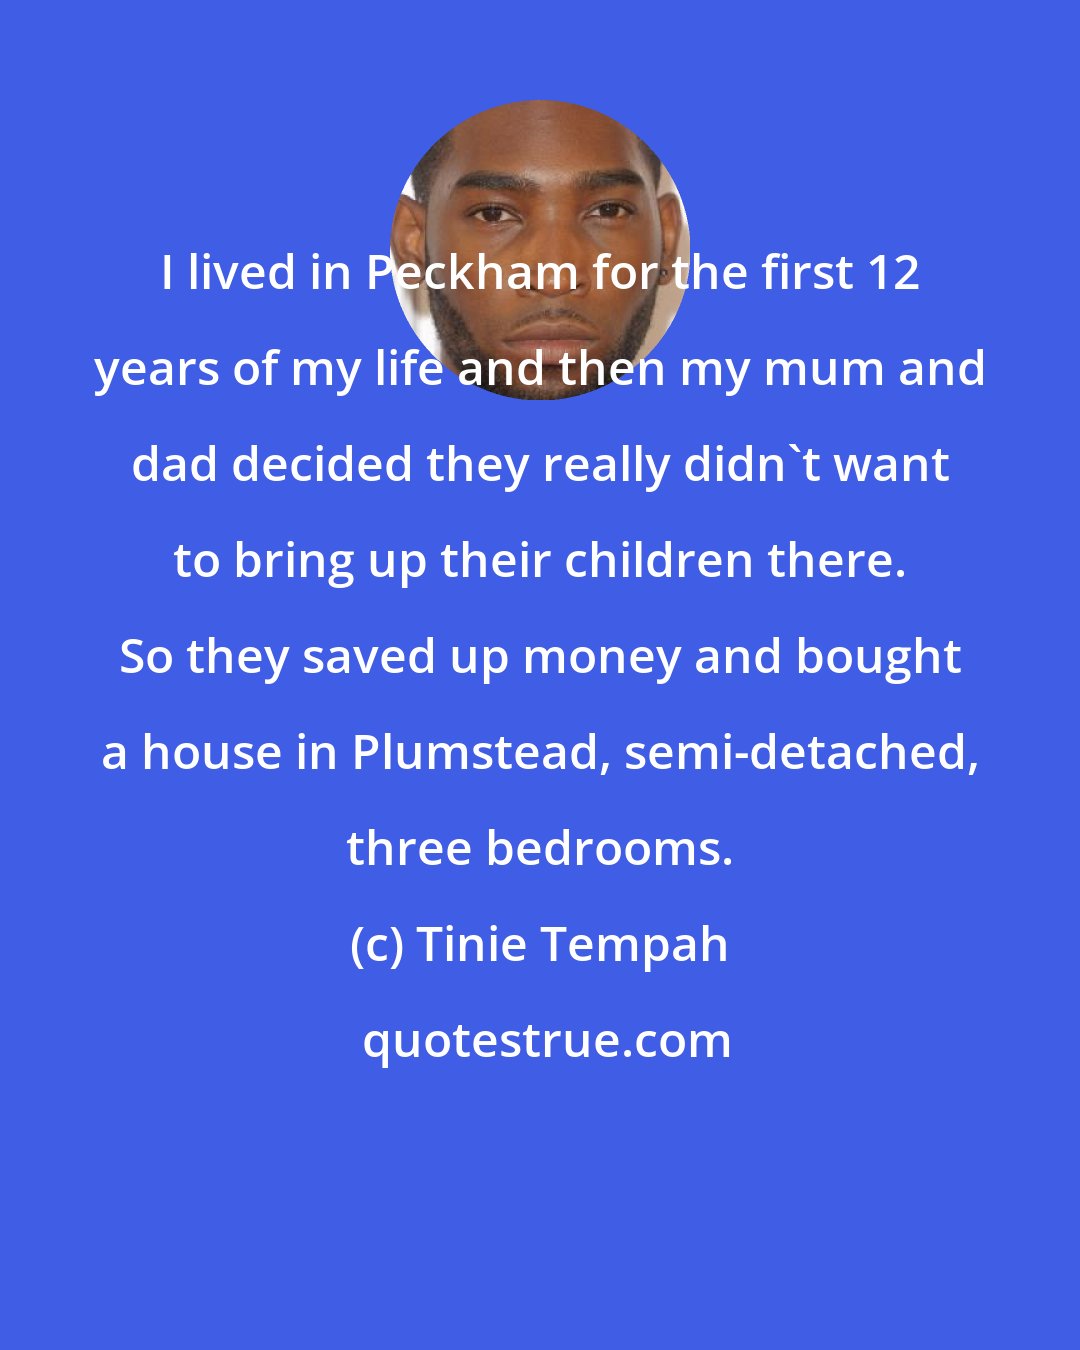 Tinie Tempah: I lived in Peckham for the first 12 years of my life and then my mum and dad decided they really didn't want to bring up their children there. So they saved up money and bought a house in Plumstead, semi-detached, three bedrooms.